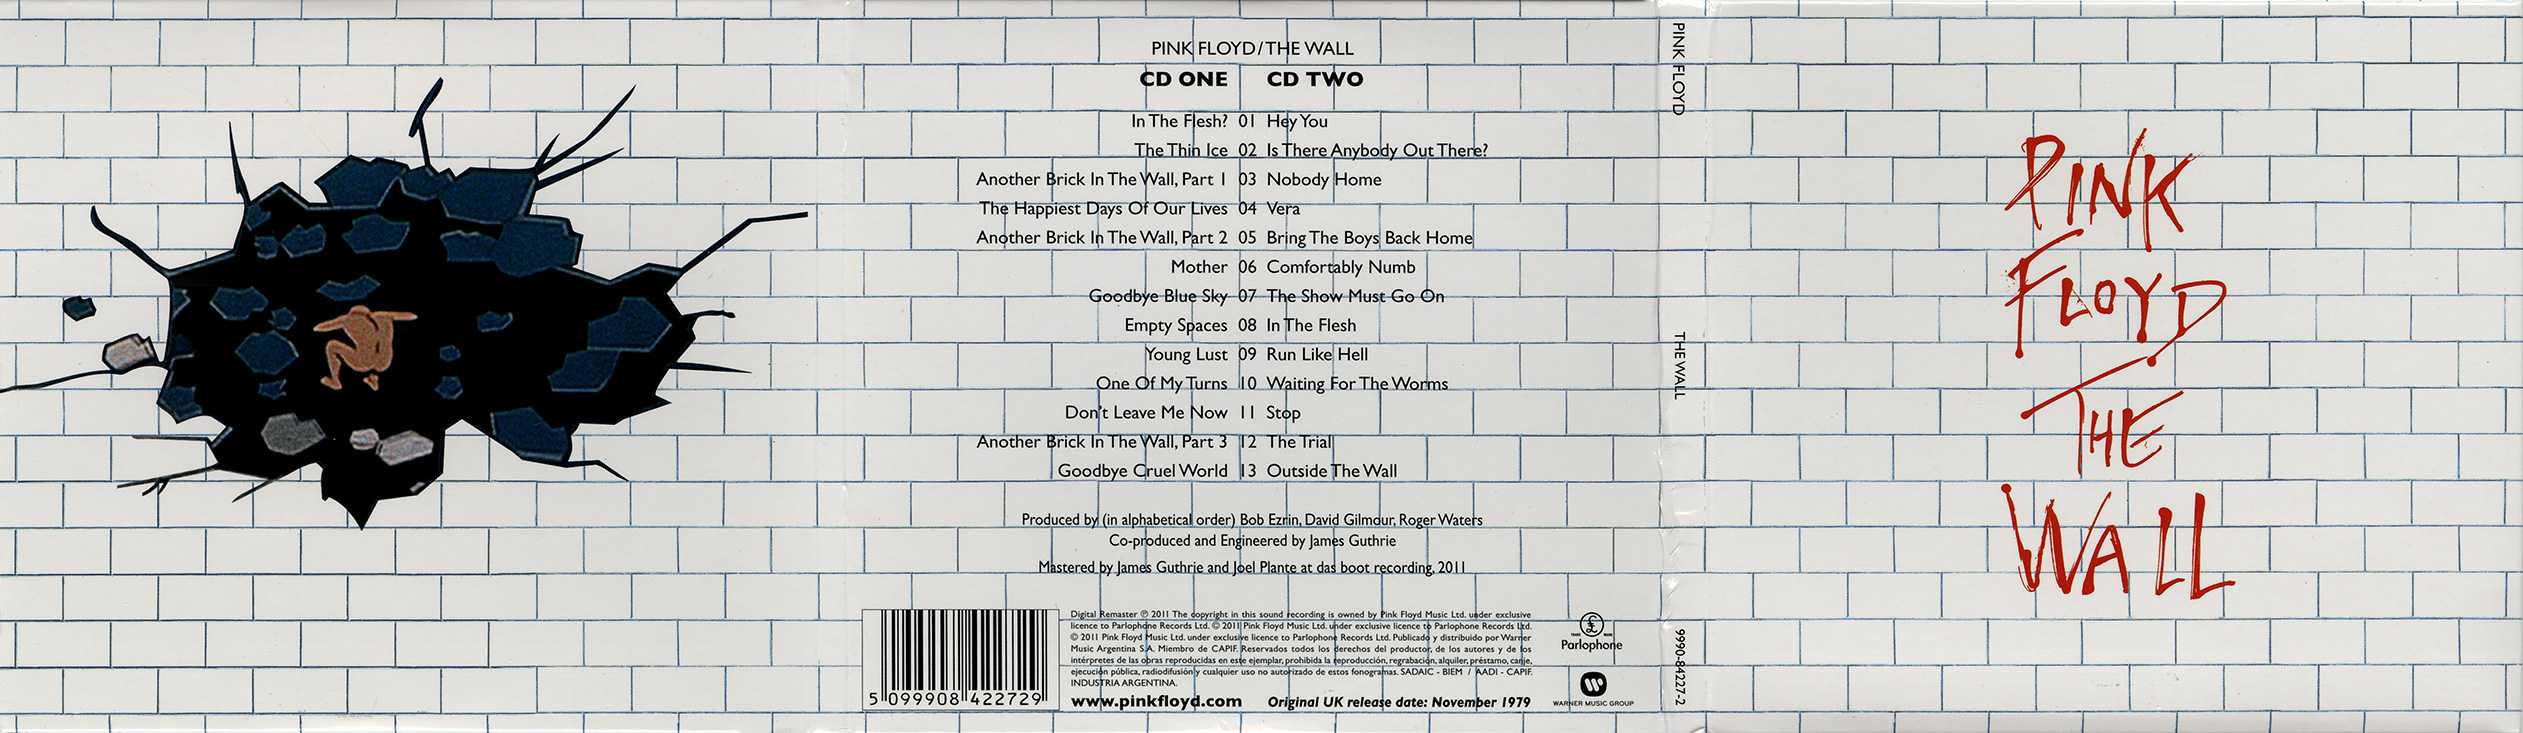 История песни another brick in the wall - pink floyd